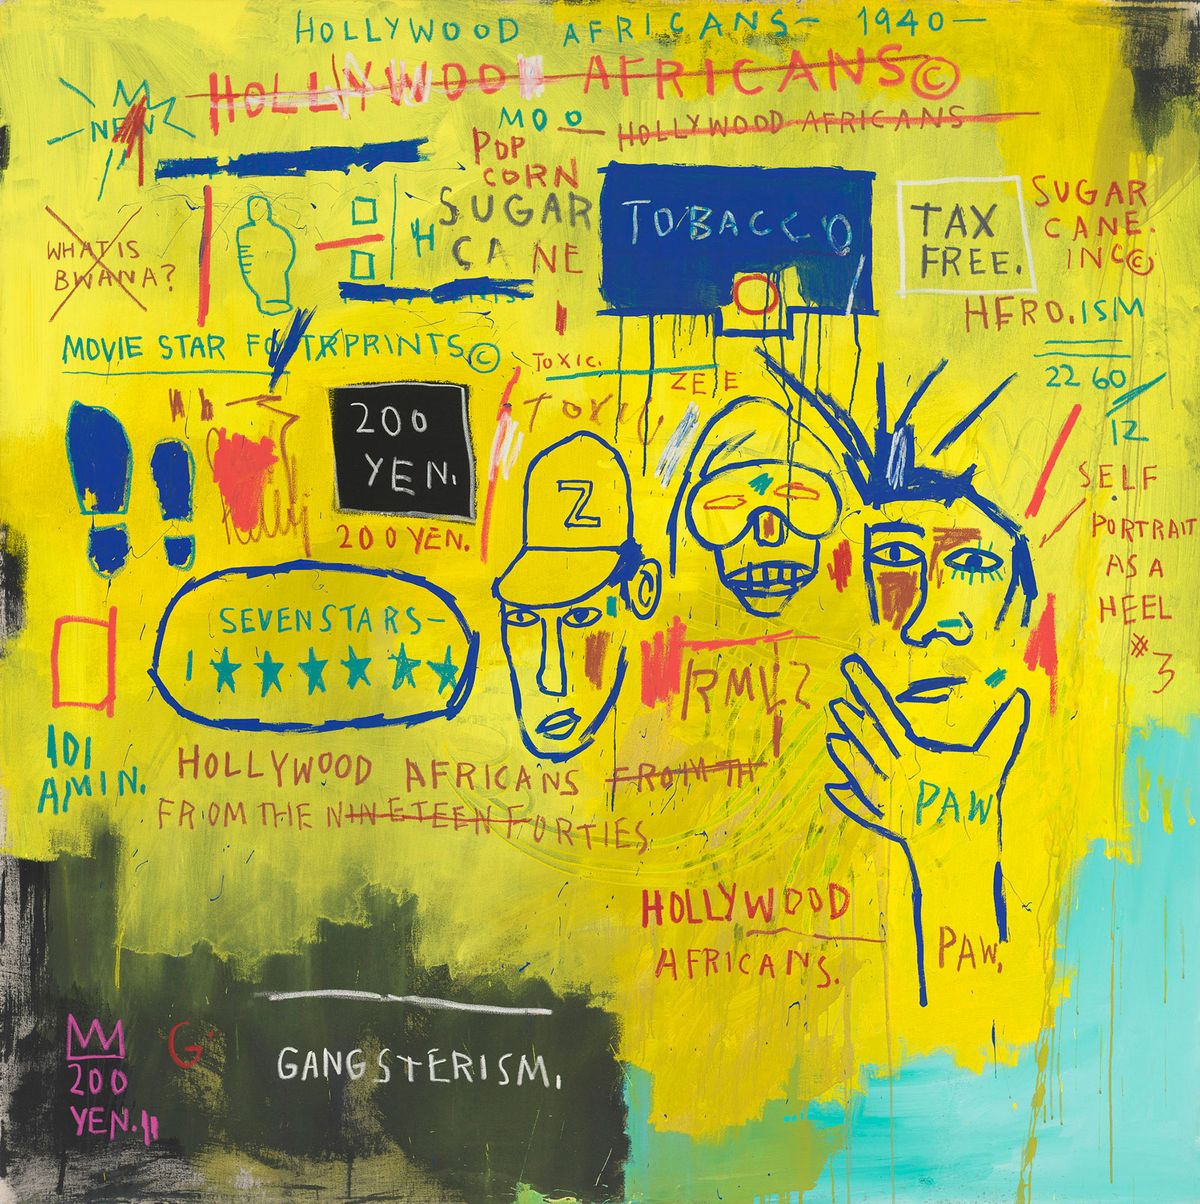 Hollywood Africans (1983) by Jean-Michel Basquiat includes portraits of fellow artists Rammellzee and Toxic © Estate of Jean-Michel Basquiat. Licensed by Artestar, New York